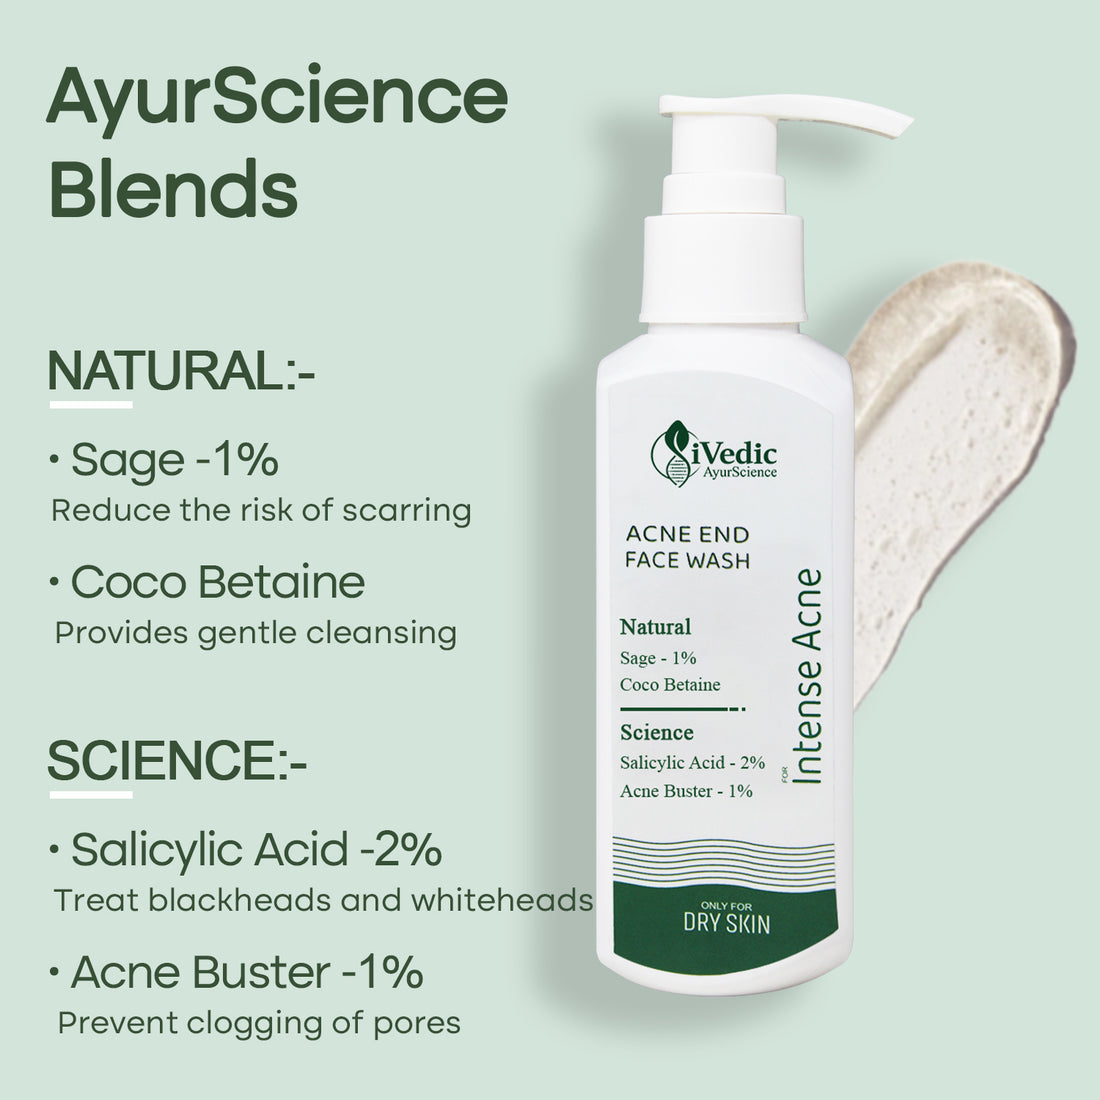 Intense Anti Acne Face Wash Cleanser (2% Salicylic Acid, 1% Acne Buster & 1% Sage) for Blackheads & Open pores